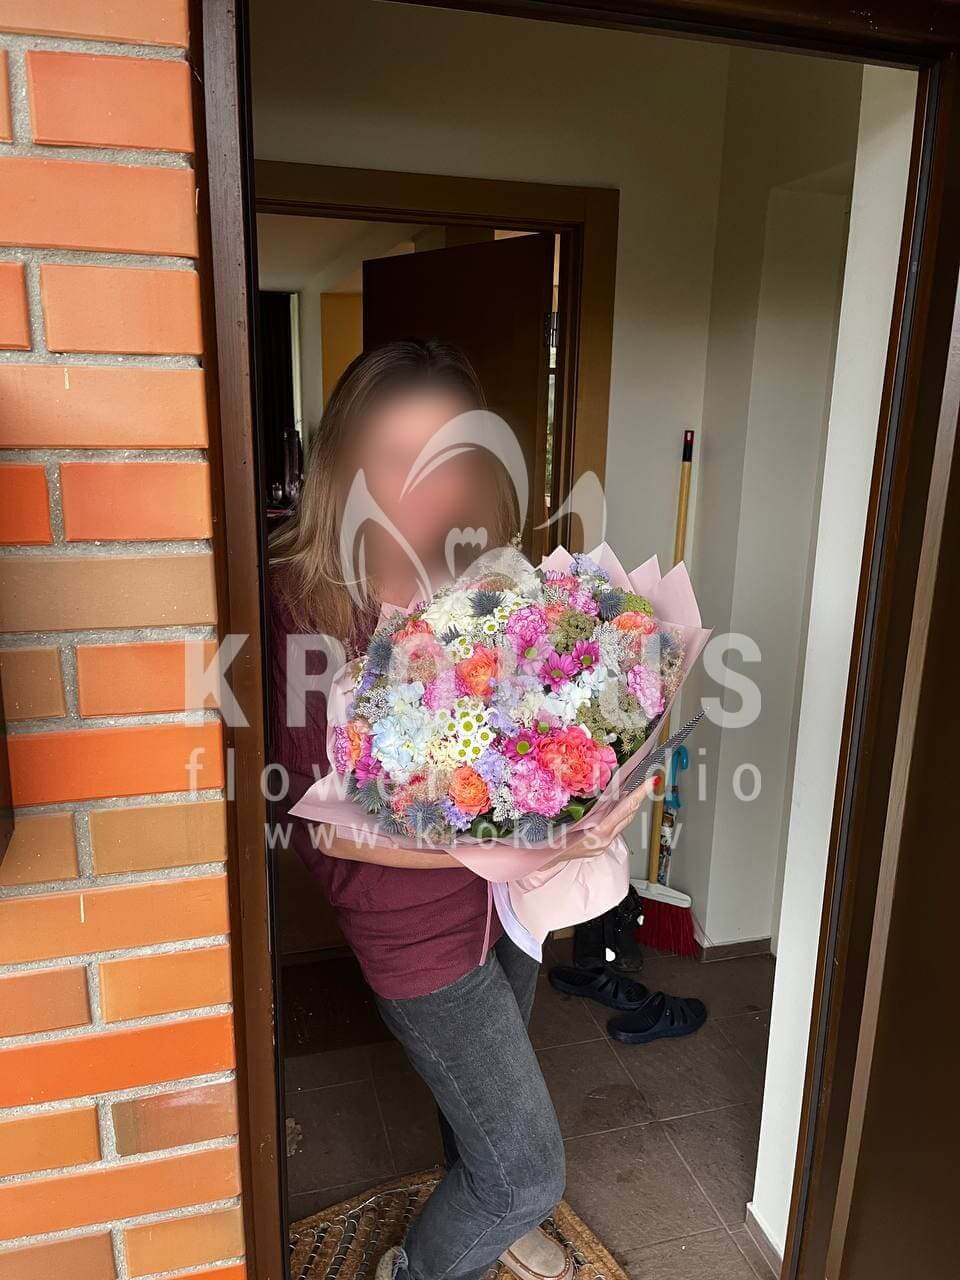 Deliver flowers to Latvia (limoniumclovesgoldenrodveronicachrysanthemumsculantrohydrangeasbicolor rosescheesewood)